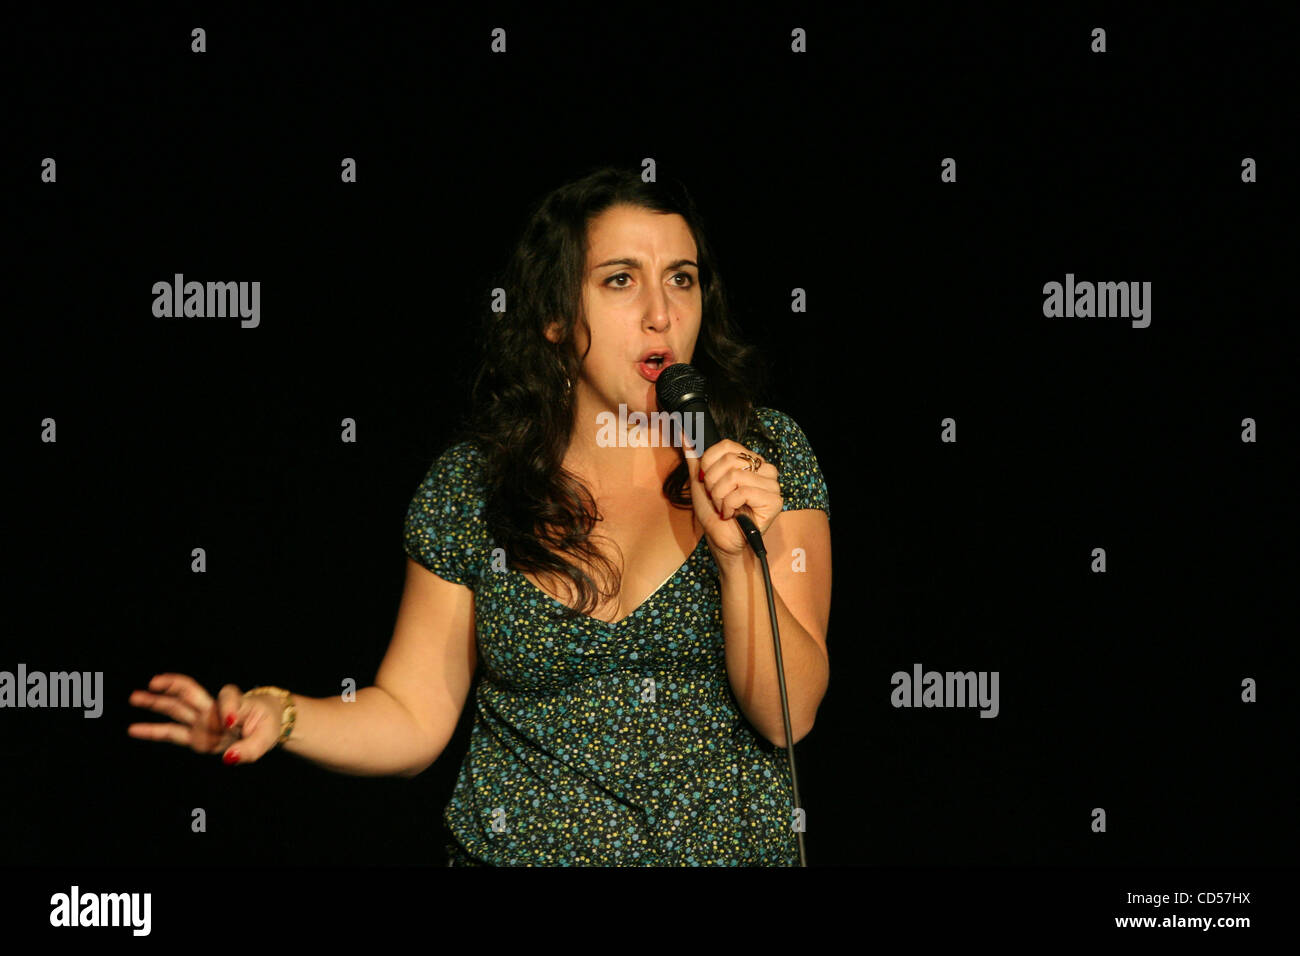 Giulia Rozzi made an appearance at the 'Hold for the Laughs' show at the Sage Theater in Manhattan Wed. 19, 2008. Giulia Rozzi is a writer, actress and stand-up comedian originally from Boston. She worked as a comic at the Hollywood Comedy Store for three years before moving to NYC where every month Stock Photo